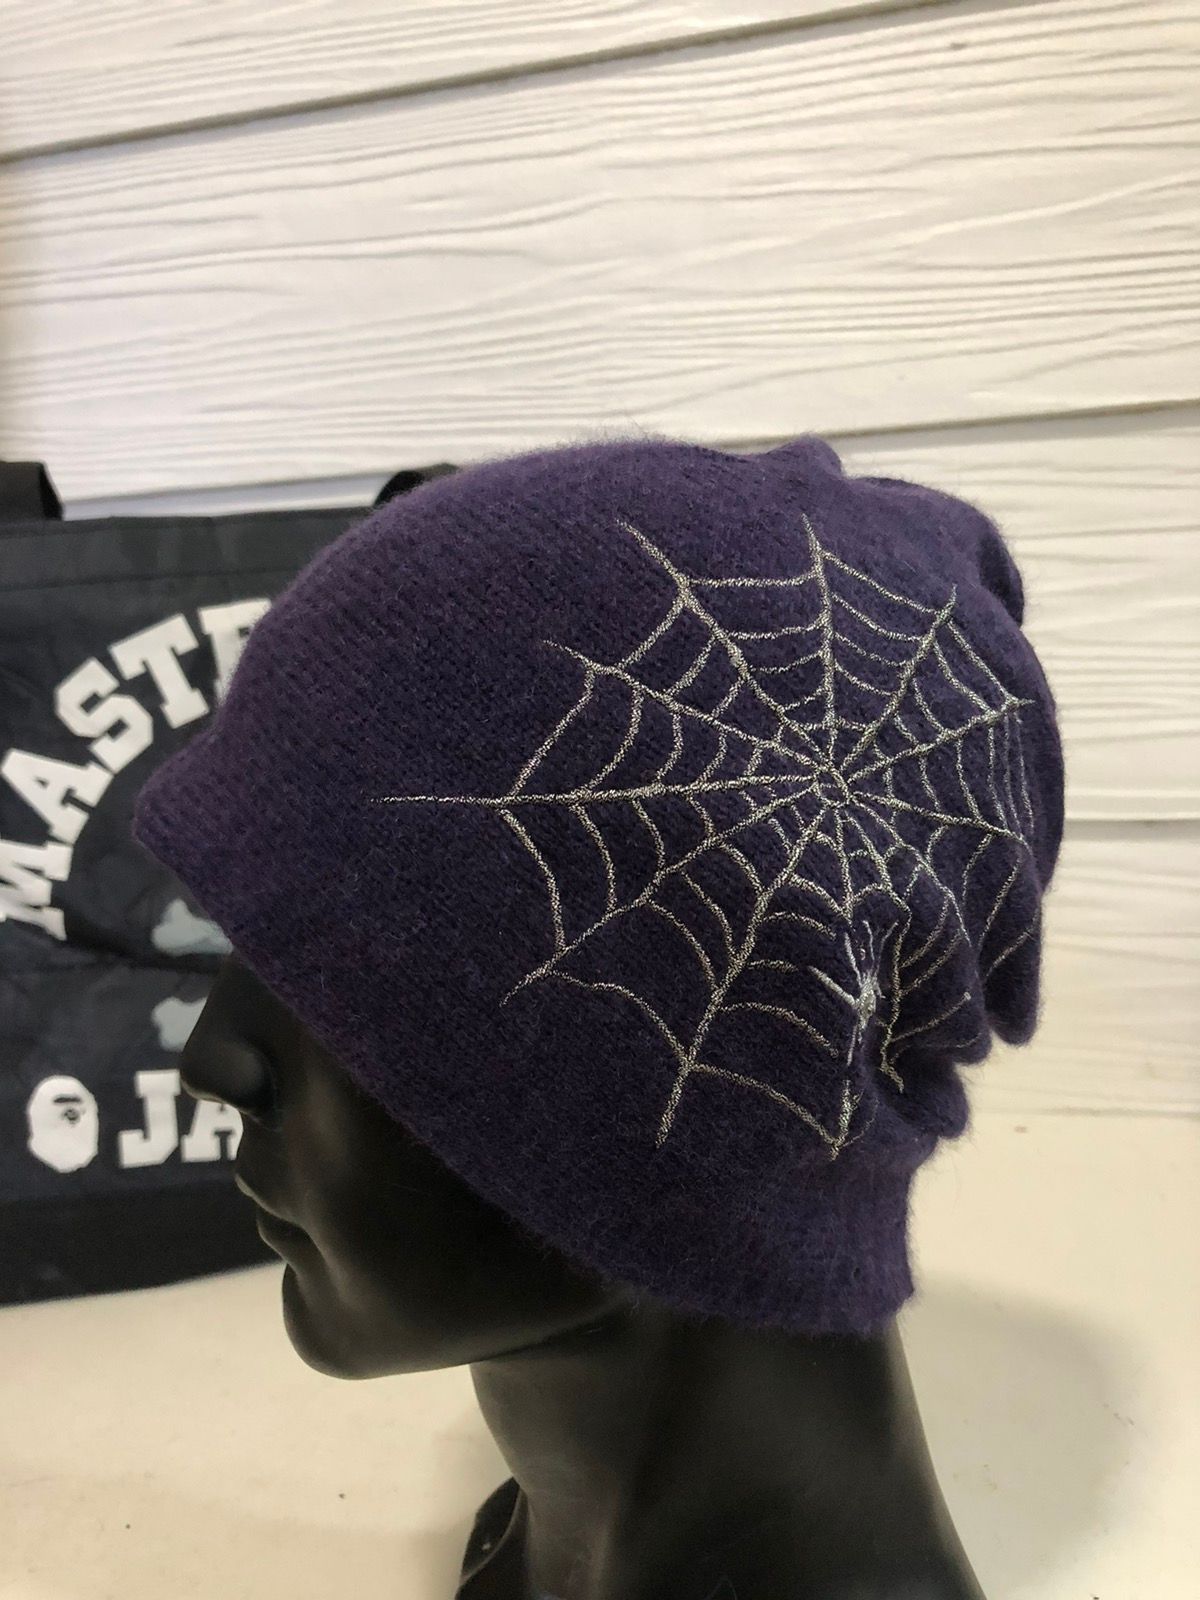 Hysteric Glamour Hysteric Glamour spider web beanie | Grailed